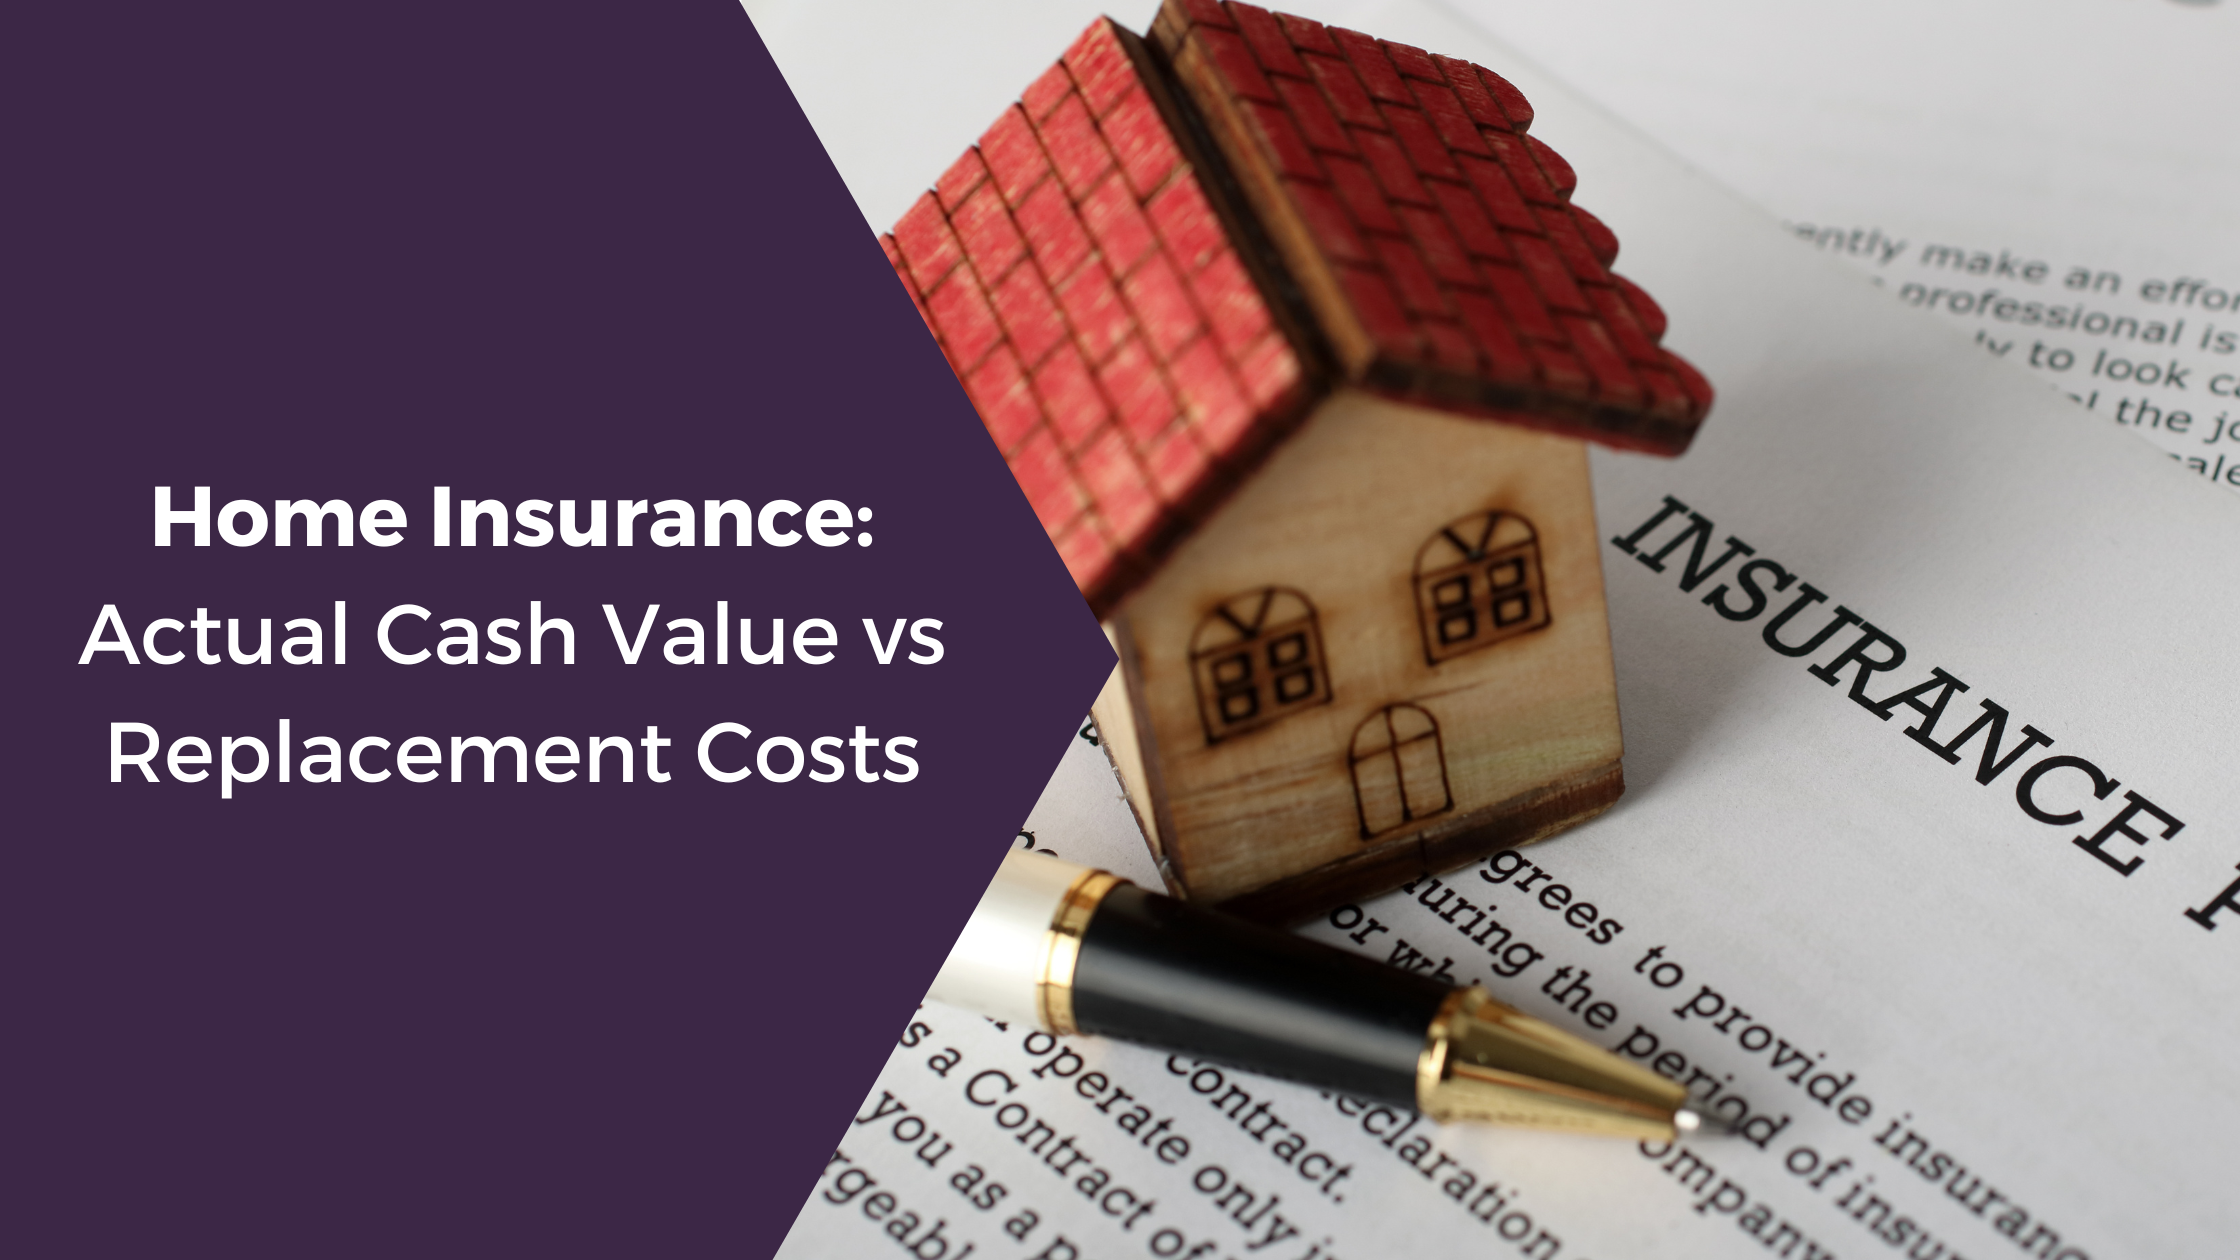 Home Insurance: Actual Cash Value vs Replacement Costs